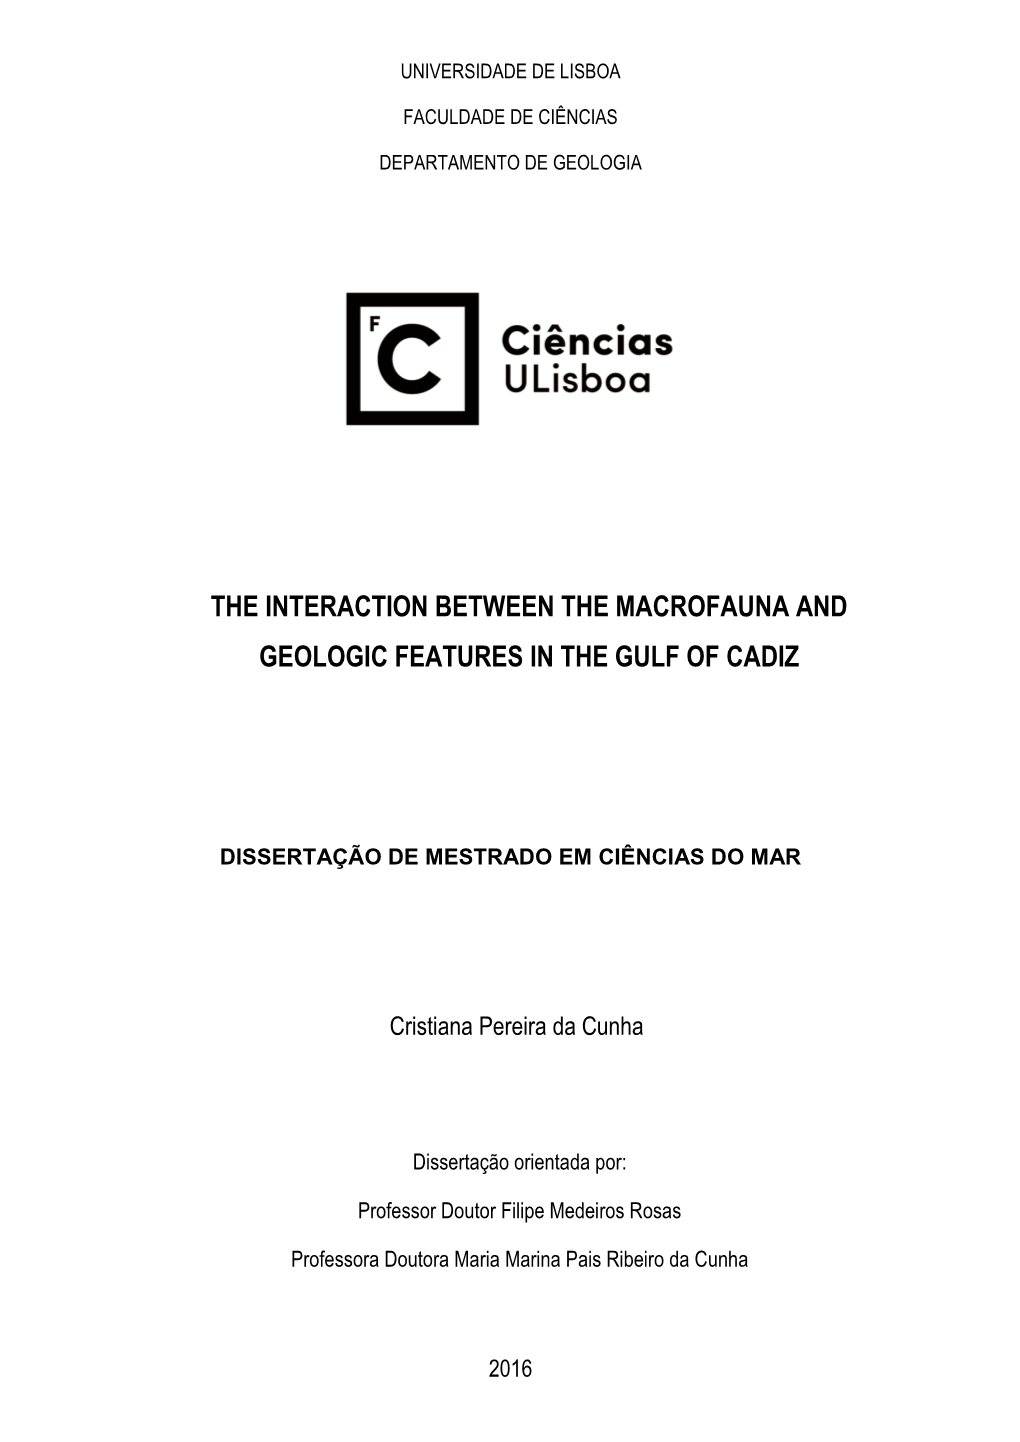 The Interaction Between the Macrofauna and Geologic Features in the Gulf of Cadiz